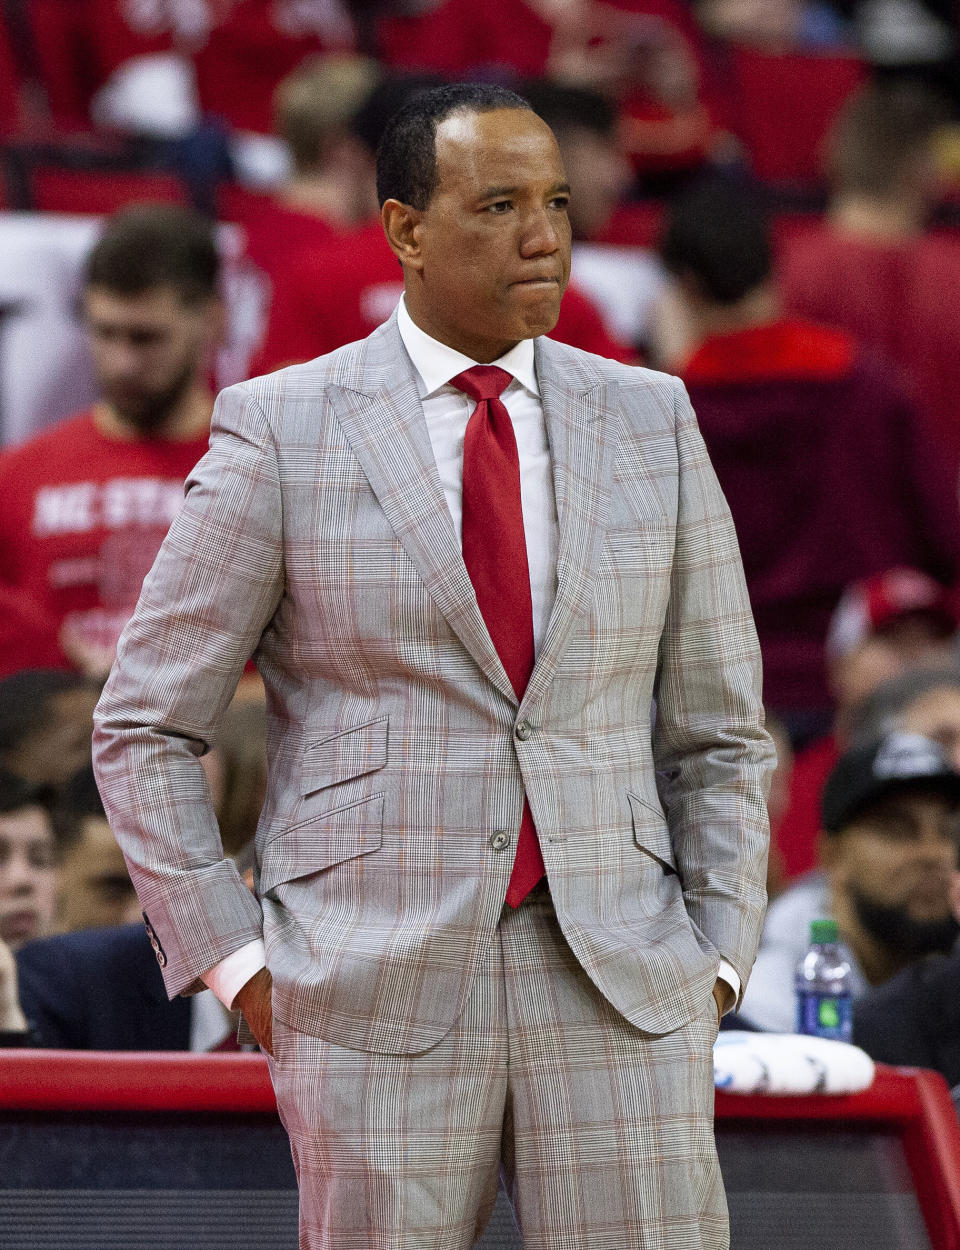 North Carolina State Head Coach Kevin Keatts looks towards the court in the final moments of an NCAA college basketball game against Virginia Tech in Raleigh, N.C., Saturday, Feb. 2, 2019. (AP Photo/Ben McKeown)